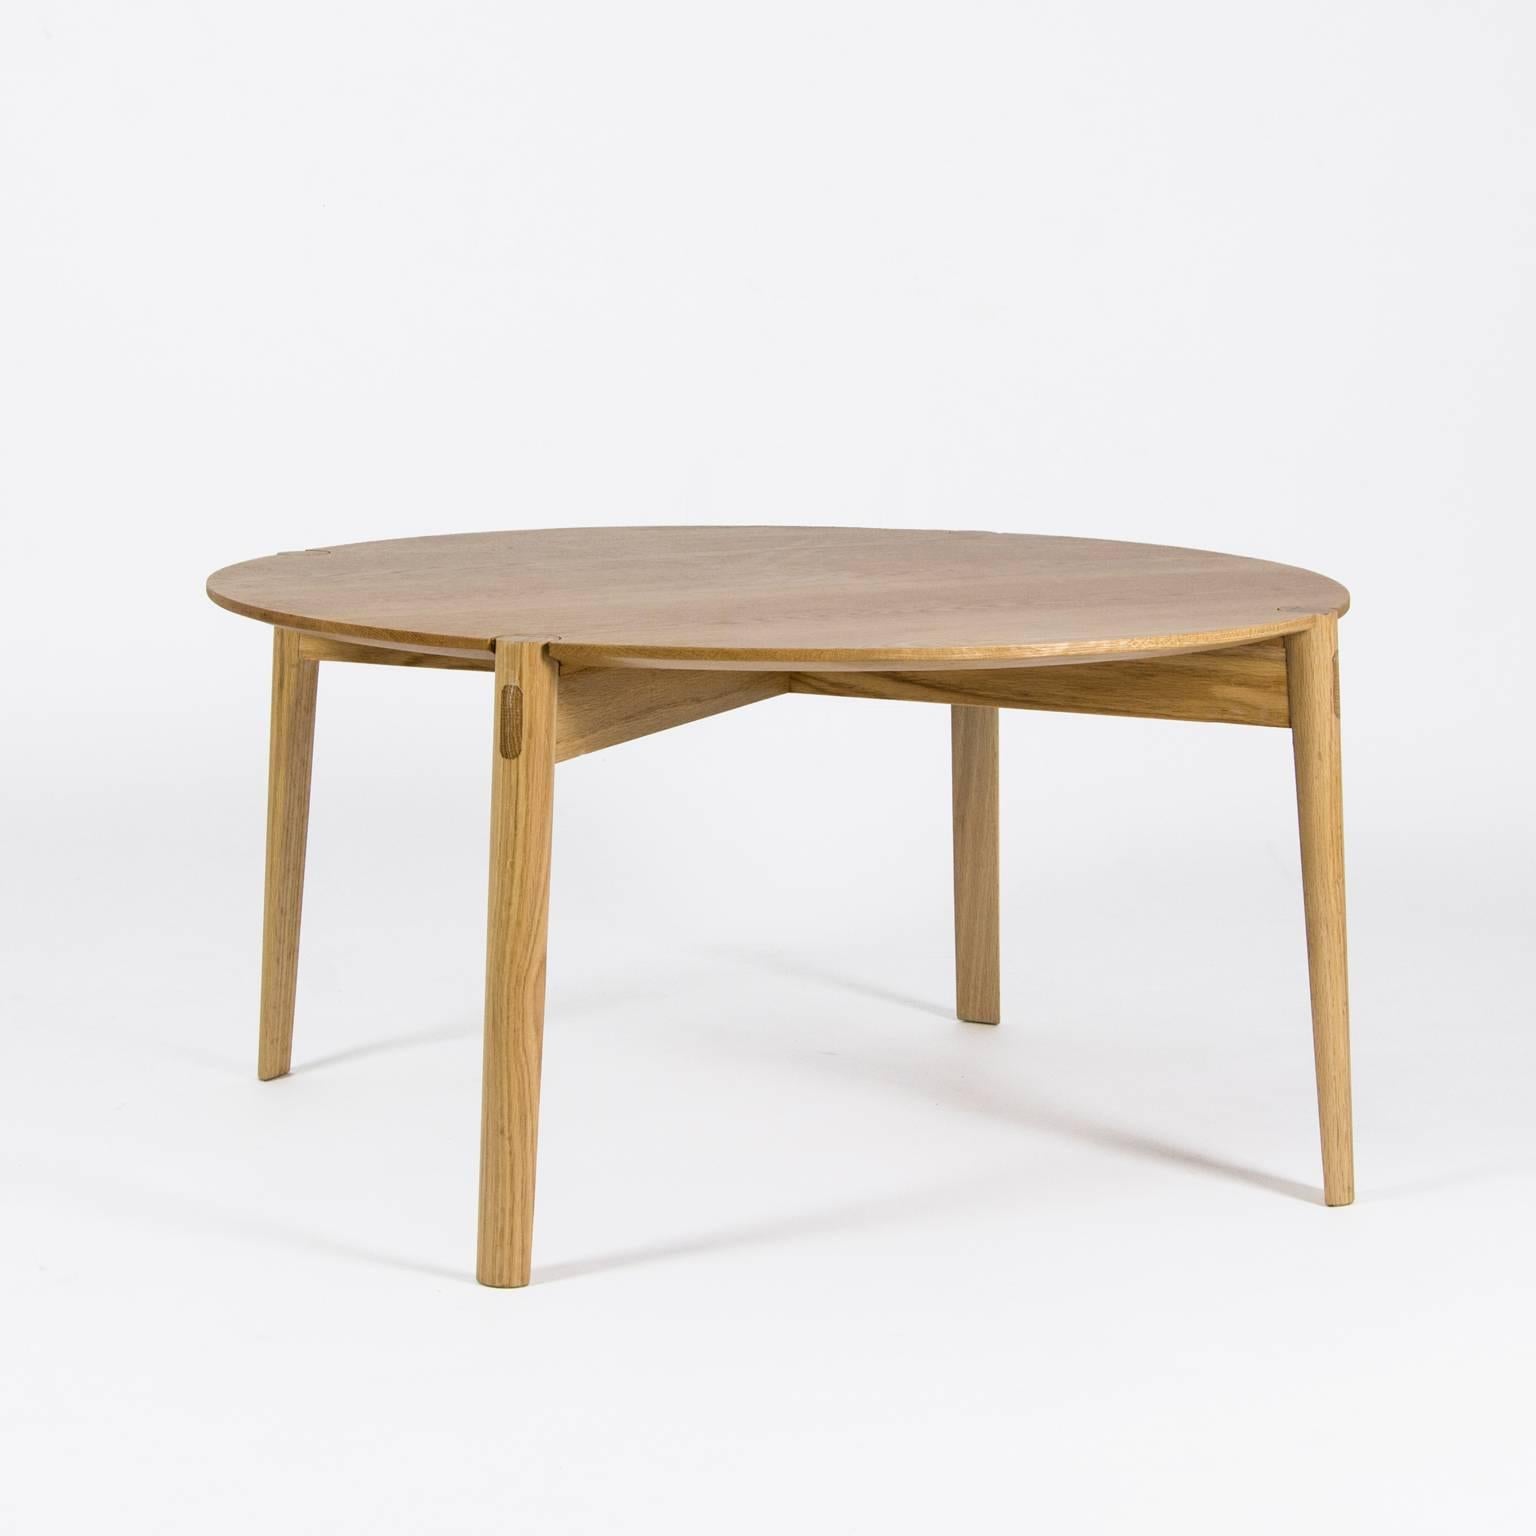 This coffee table was Influenced by Denmark’s love of materials and well-crafted design. Jonah Willcox-Healey developed the Nora table; a sturdy, simple and beautifully hand-crafted coffee table.  